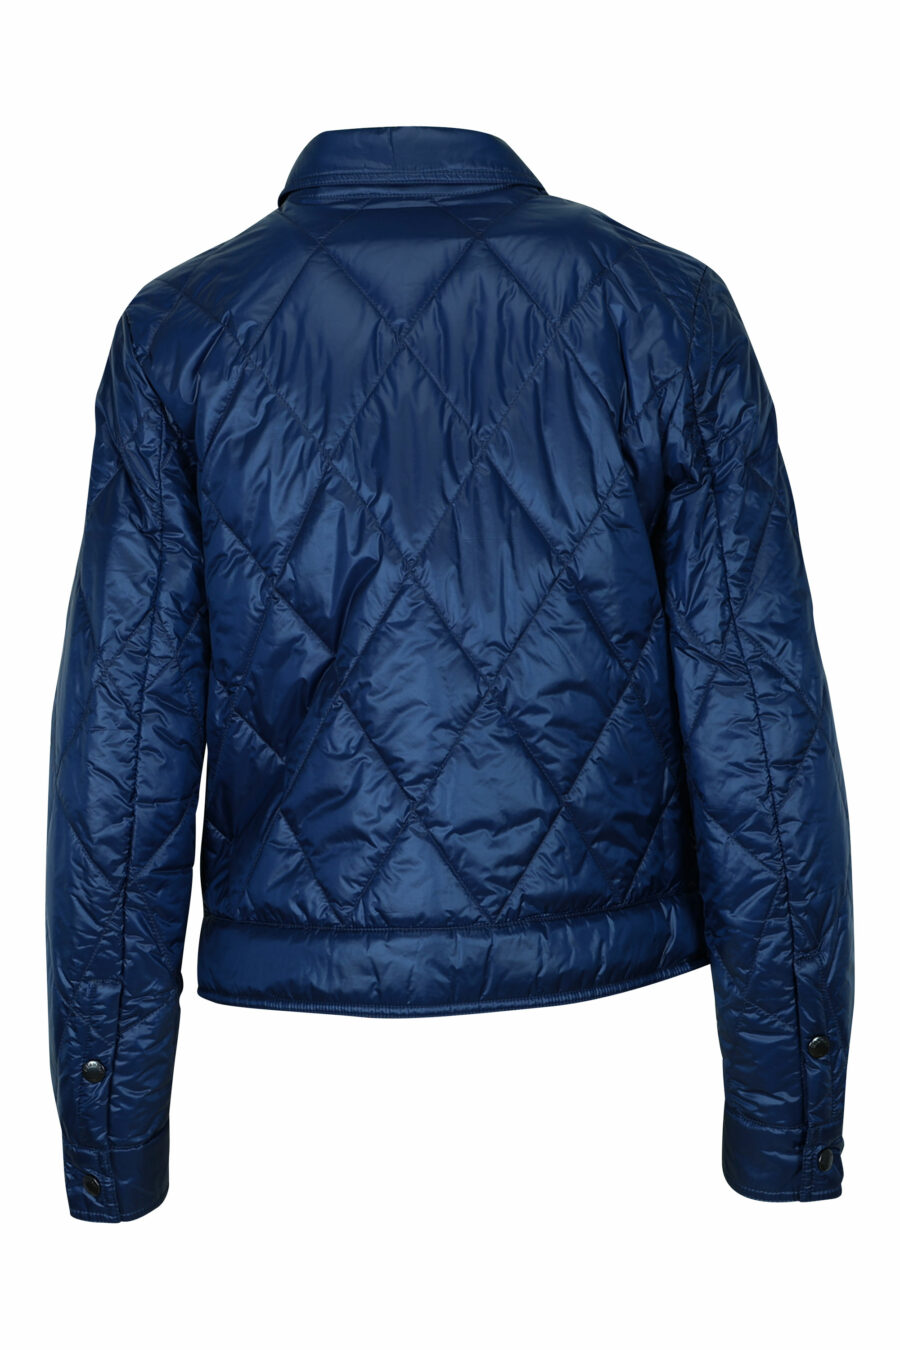 Blue jacket with wavy lines and logo side patch - 8058610804732 1